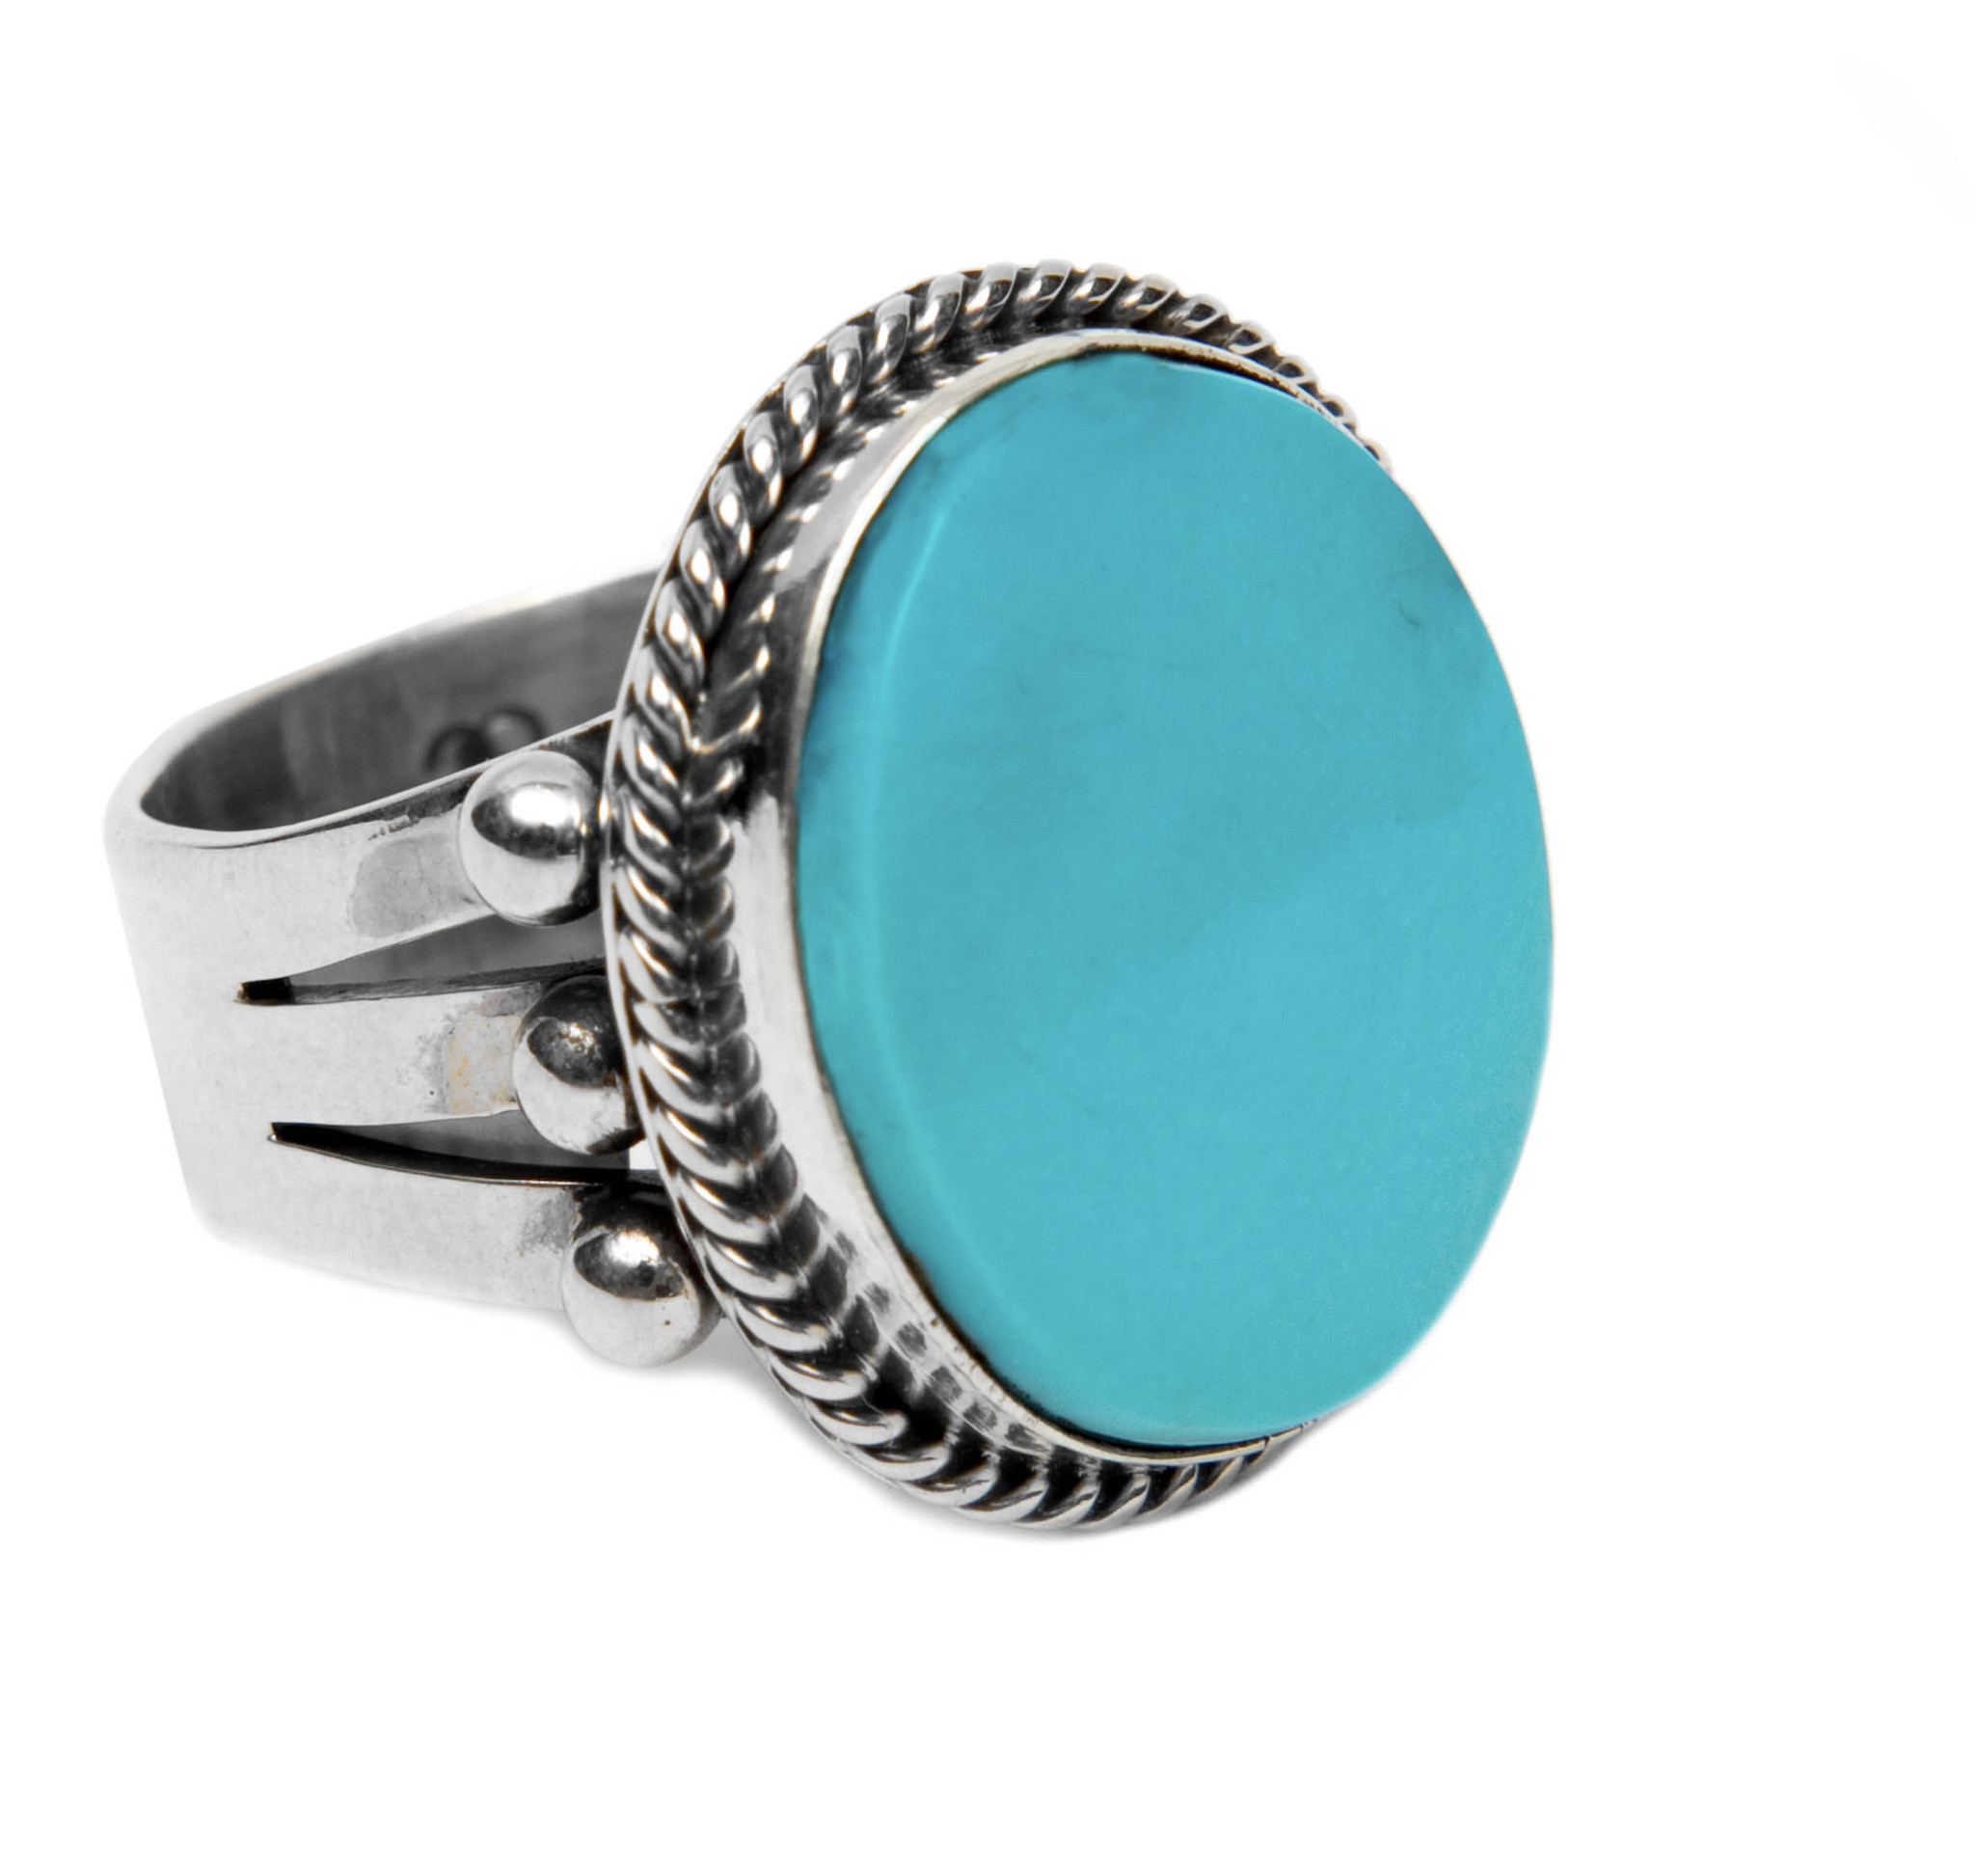 Natural Castle Dome Turquoise Ring by Randy and Etta Endito (Navajo)